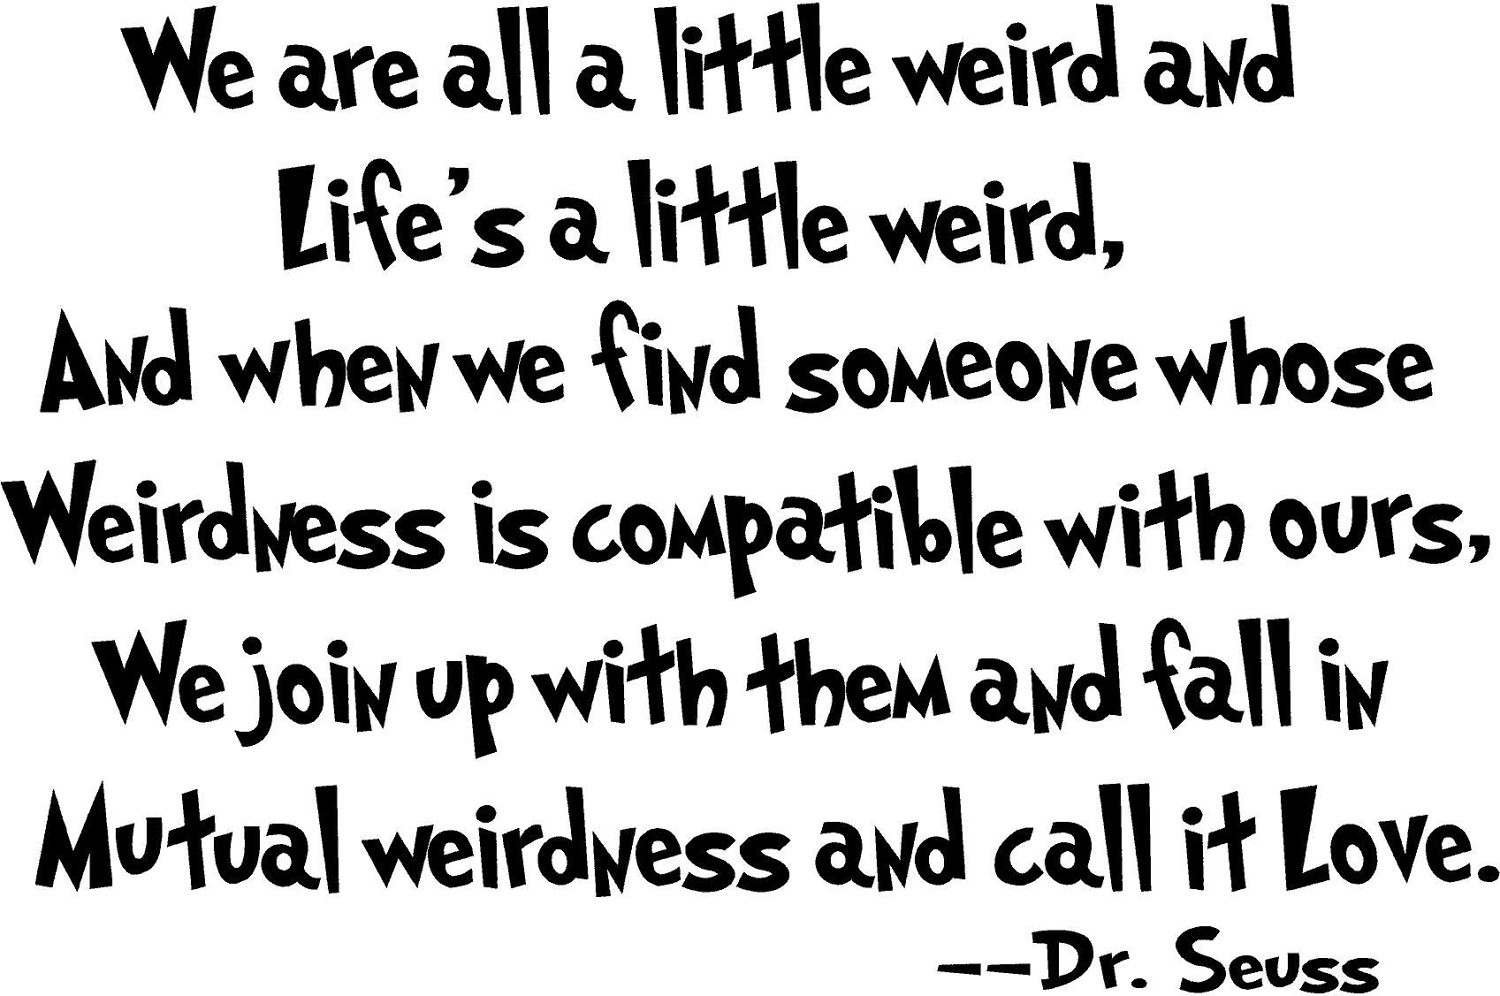 Dr Seuss Quotes Love
 Falling into mutual Weirdness…